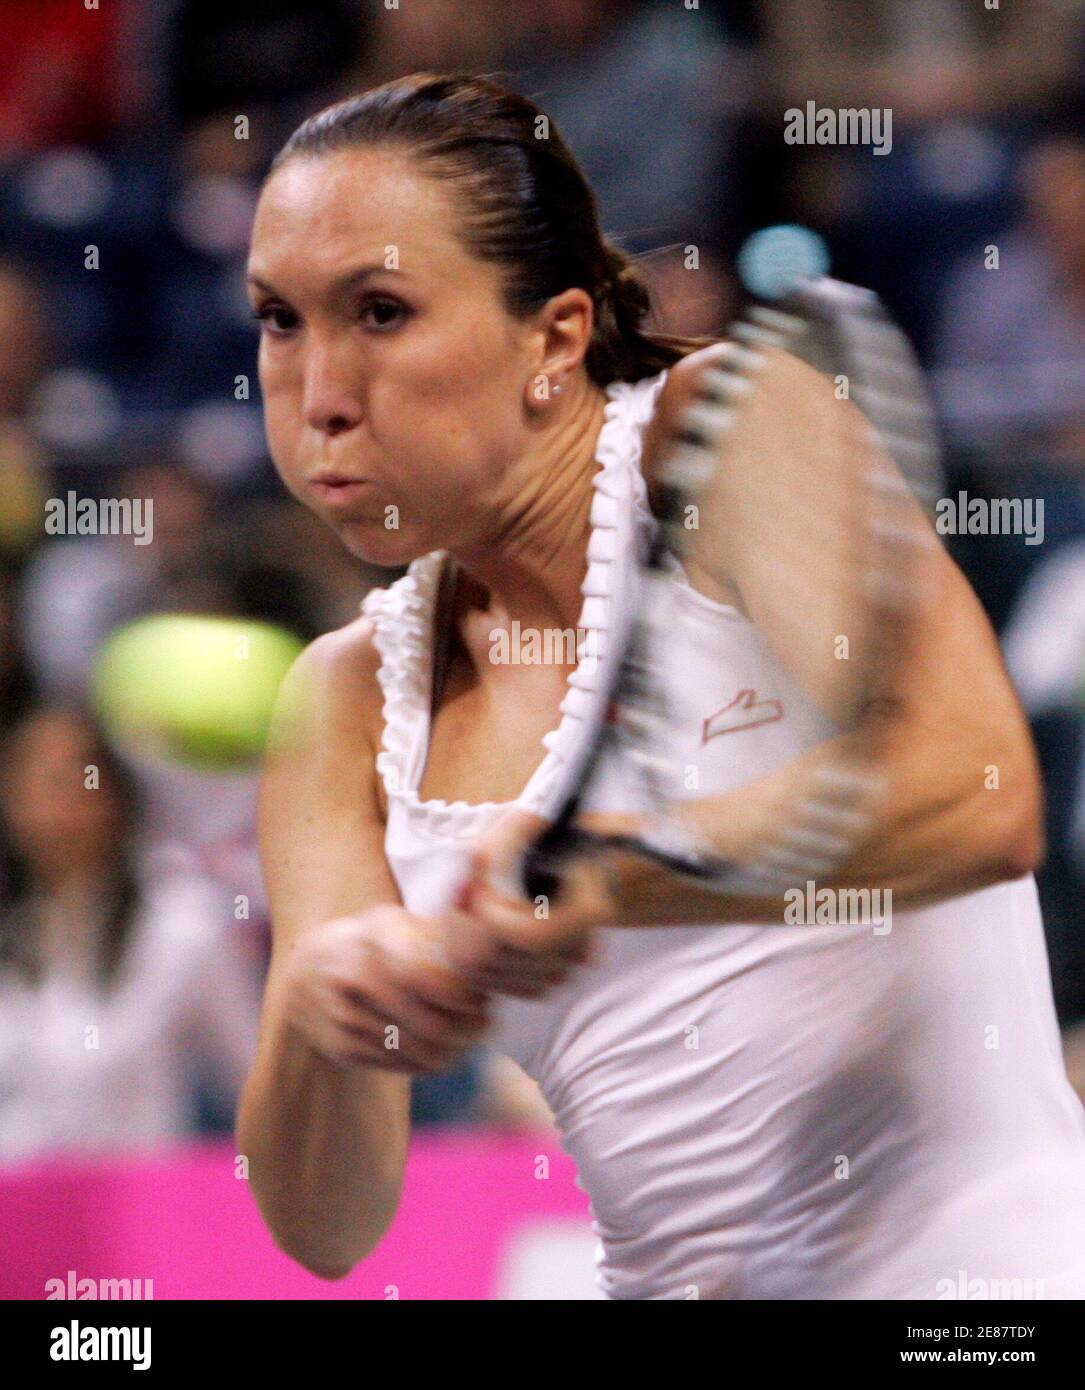 Serbia's Jelena Jankovic returns to Japan's Ai Sugiyama during their match at the Fed Cup World Group II, 1st Round tennis tournament in Belgrade February 8, 2009.   REUTERS/Ivan Milutinovic(SERBIA) Stock Photo